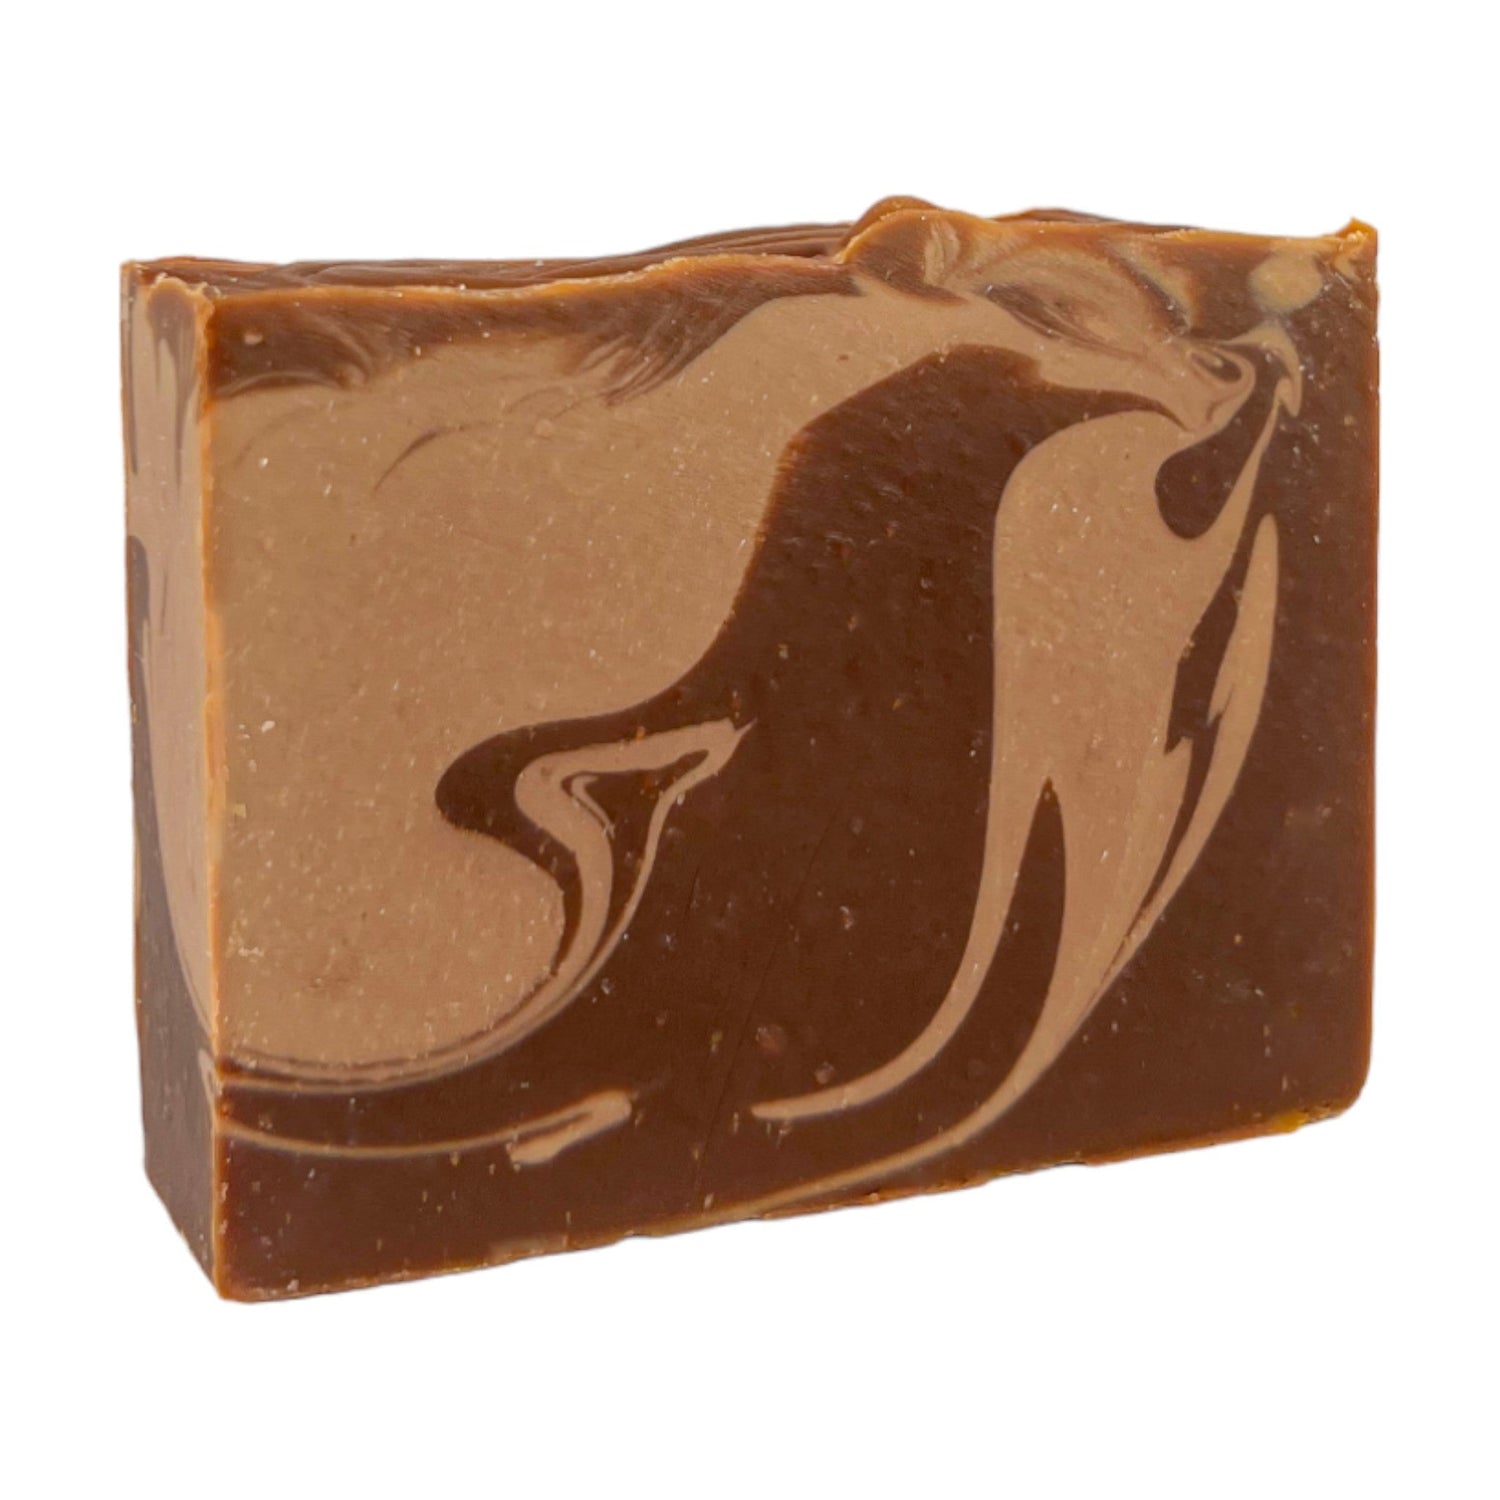 Black Knight -Bar Soap - Old Town Soap Co.